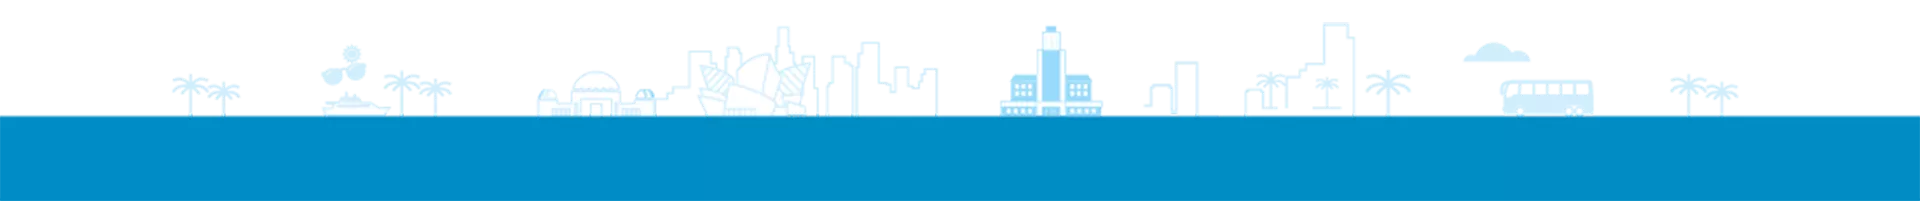 Solid blue 1920px rectangle. Outline of city structures on top of this rectangle